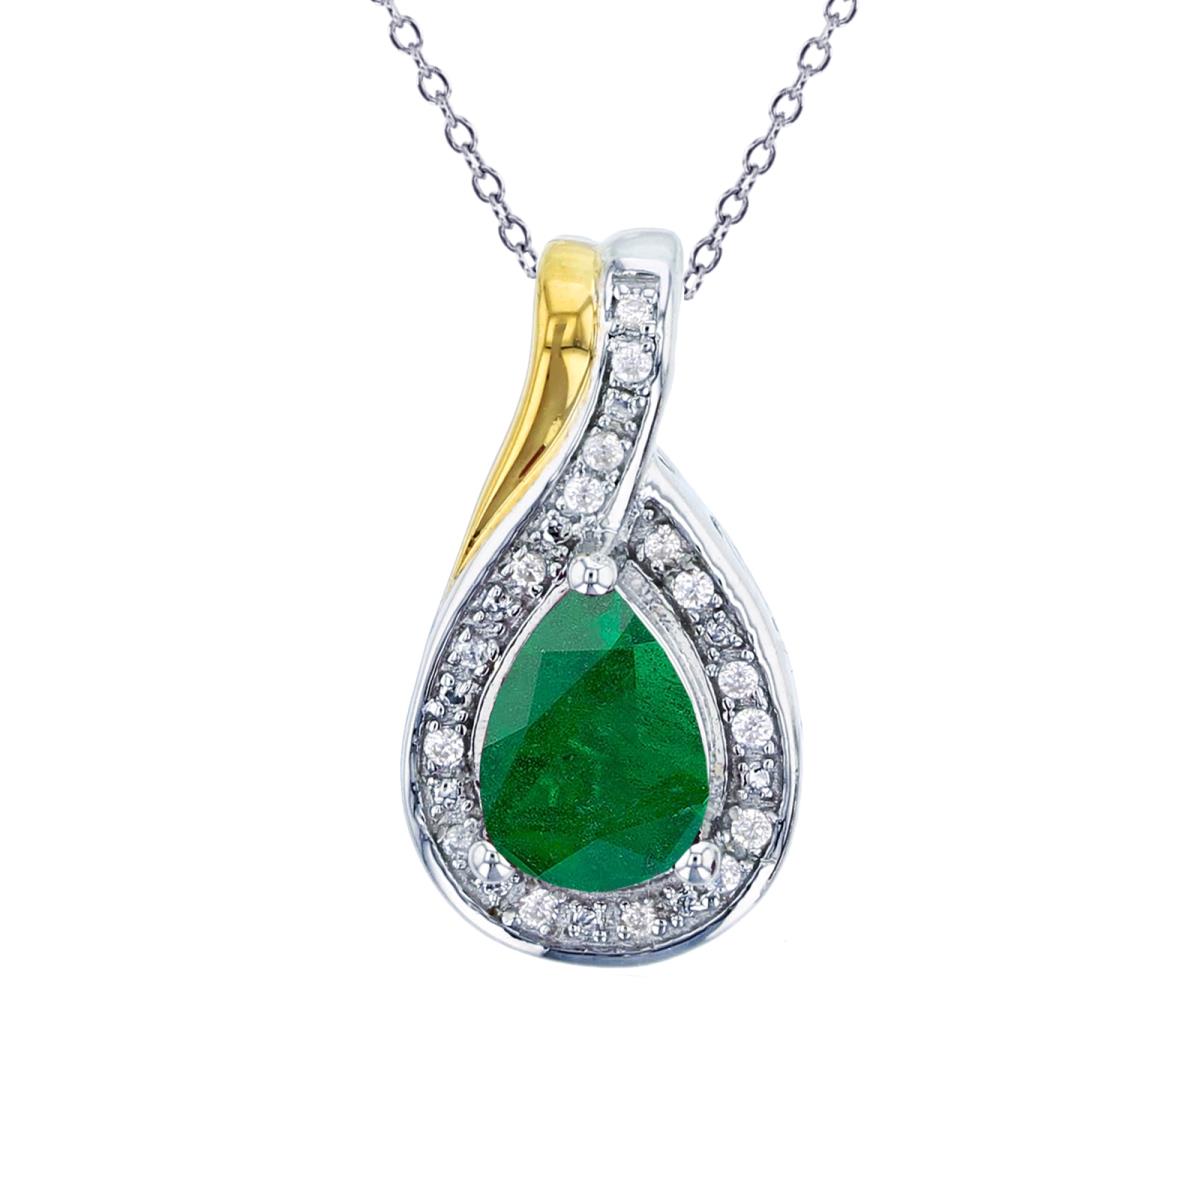 10K Yellow Gold 0.01cttw Rnd Diamonds & 7x5mm PS Emerald 18"Necklace